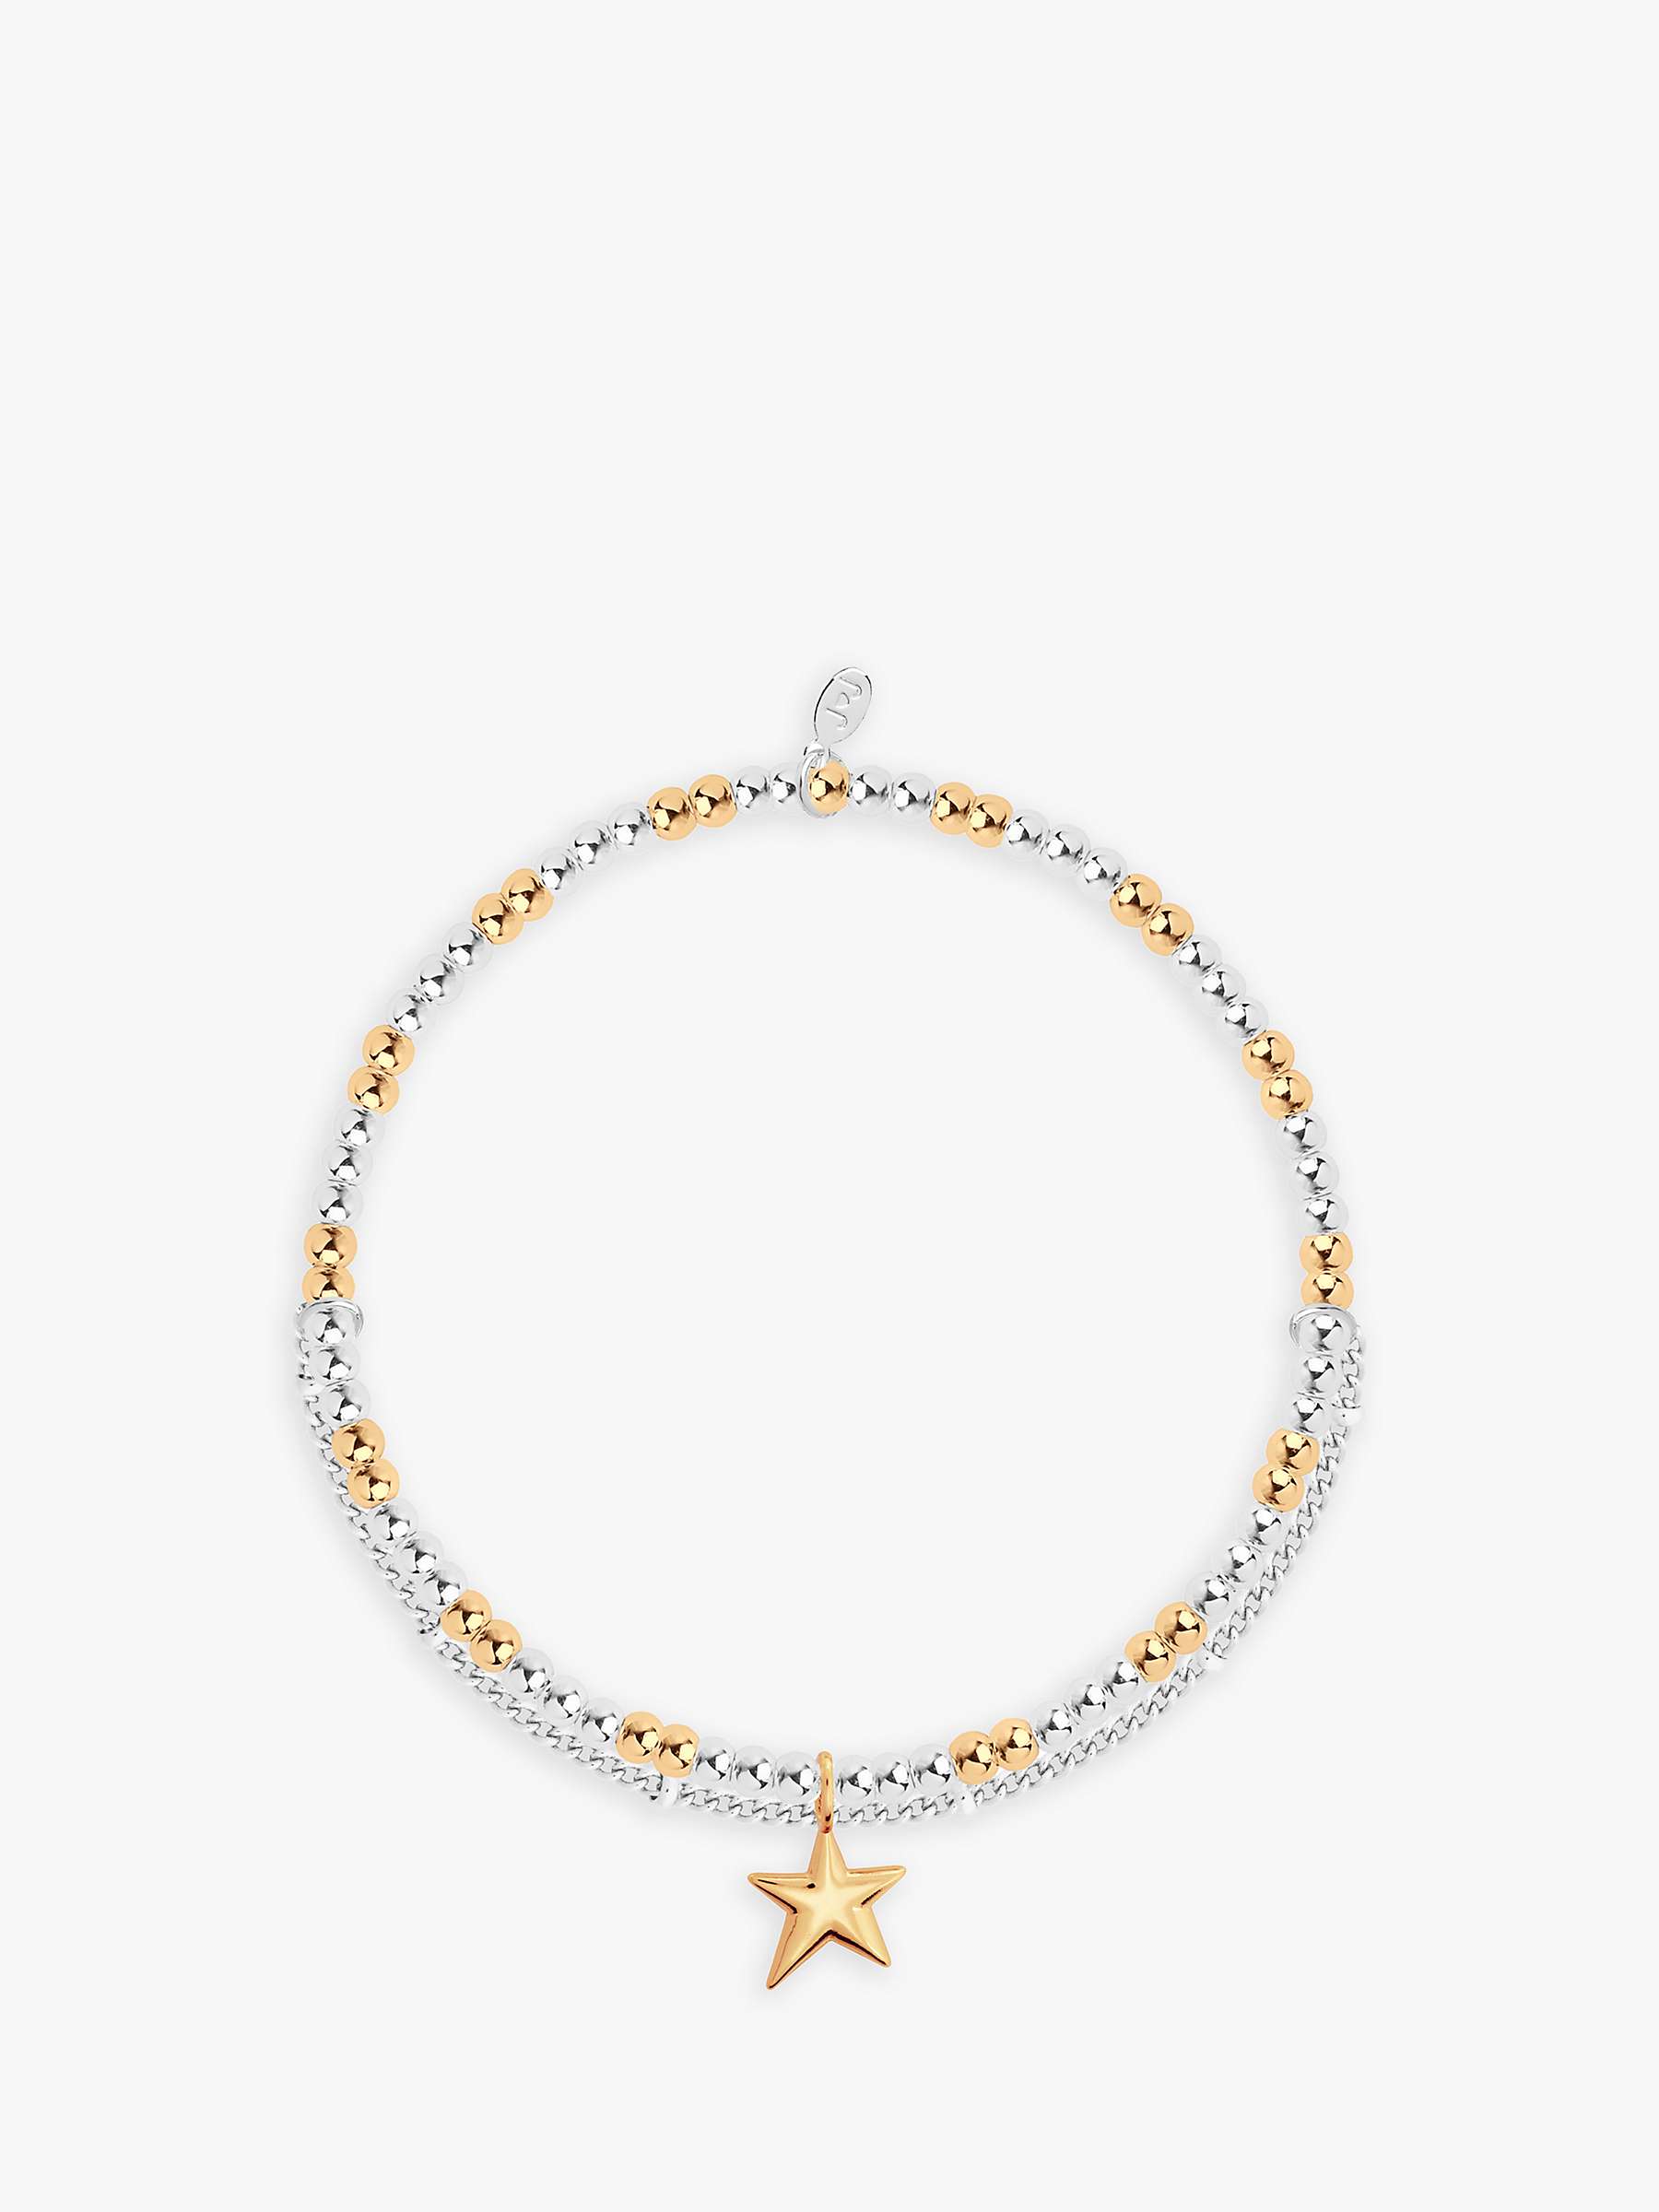 Buy Joma Jewellery Amulet Star Beaded Chain Bracelet, Silver/Gold Online at johnlewis.com